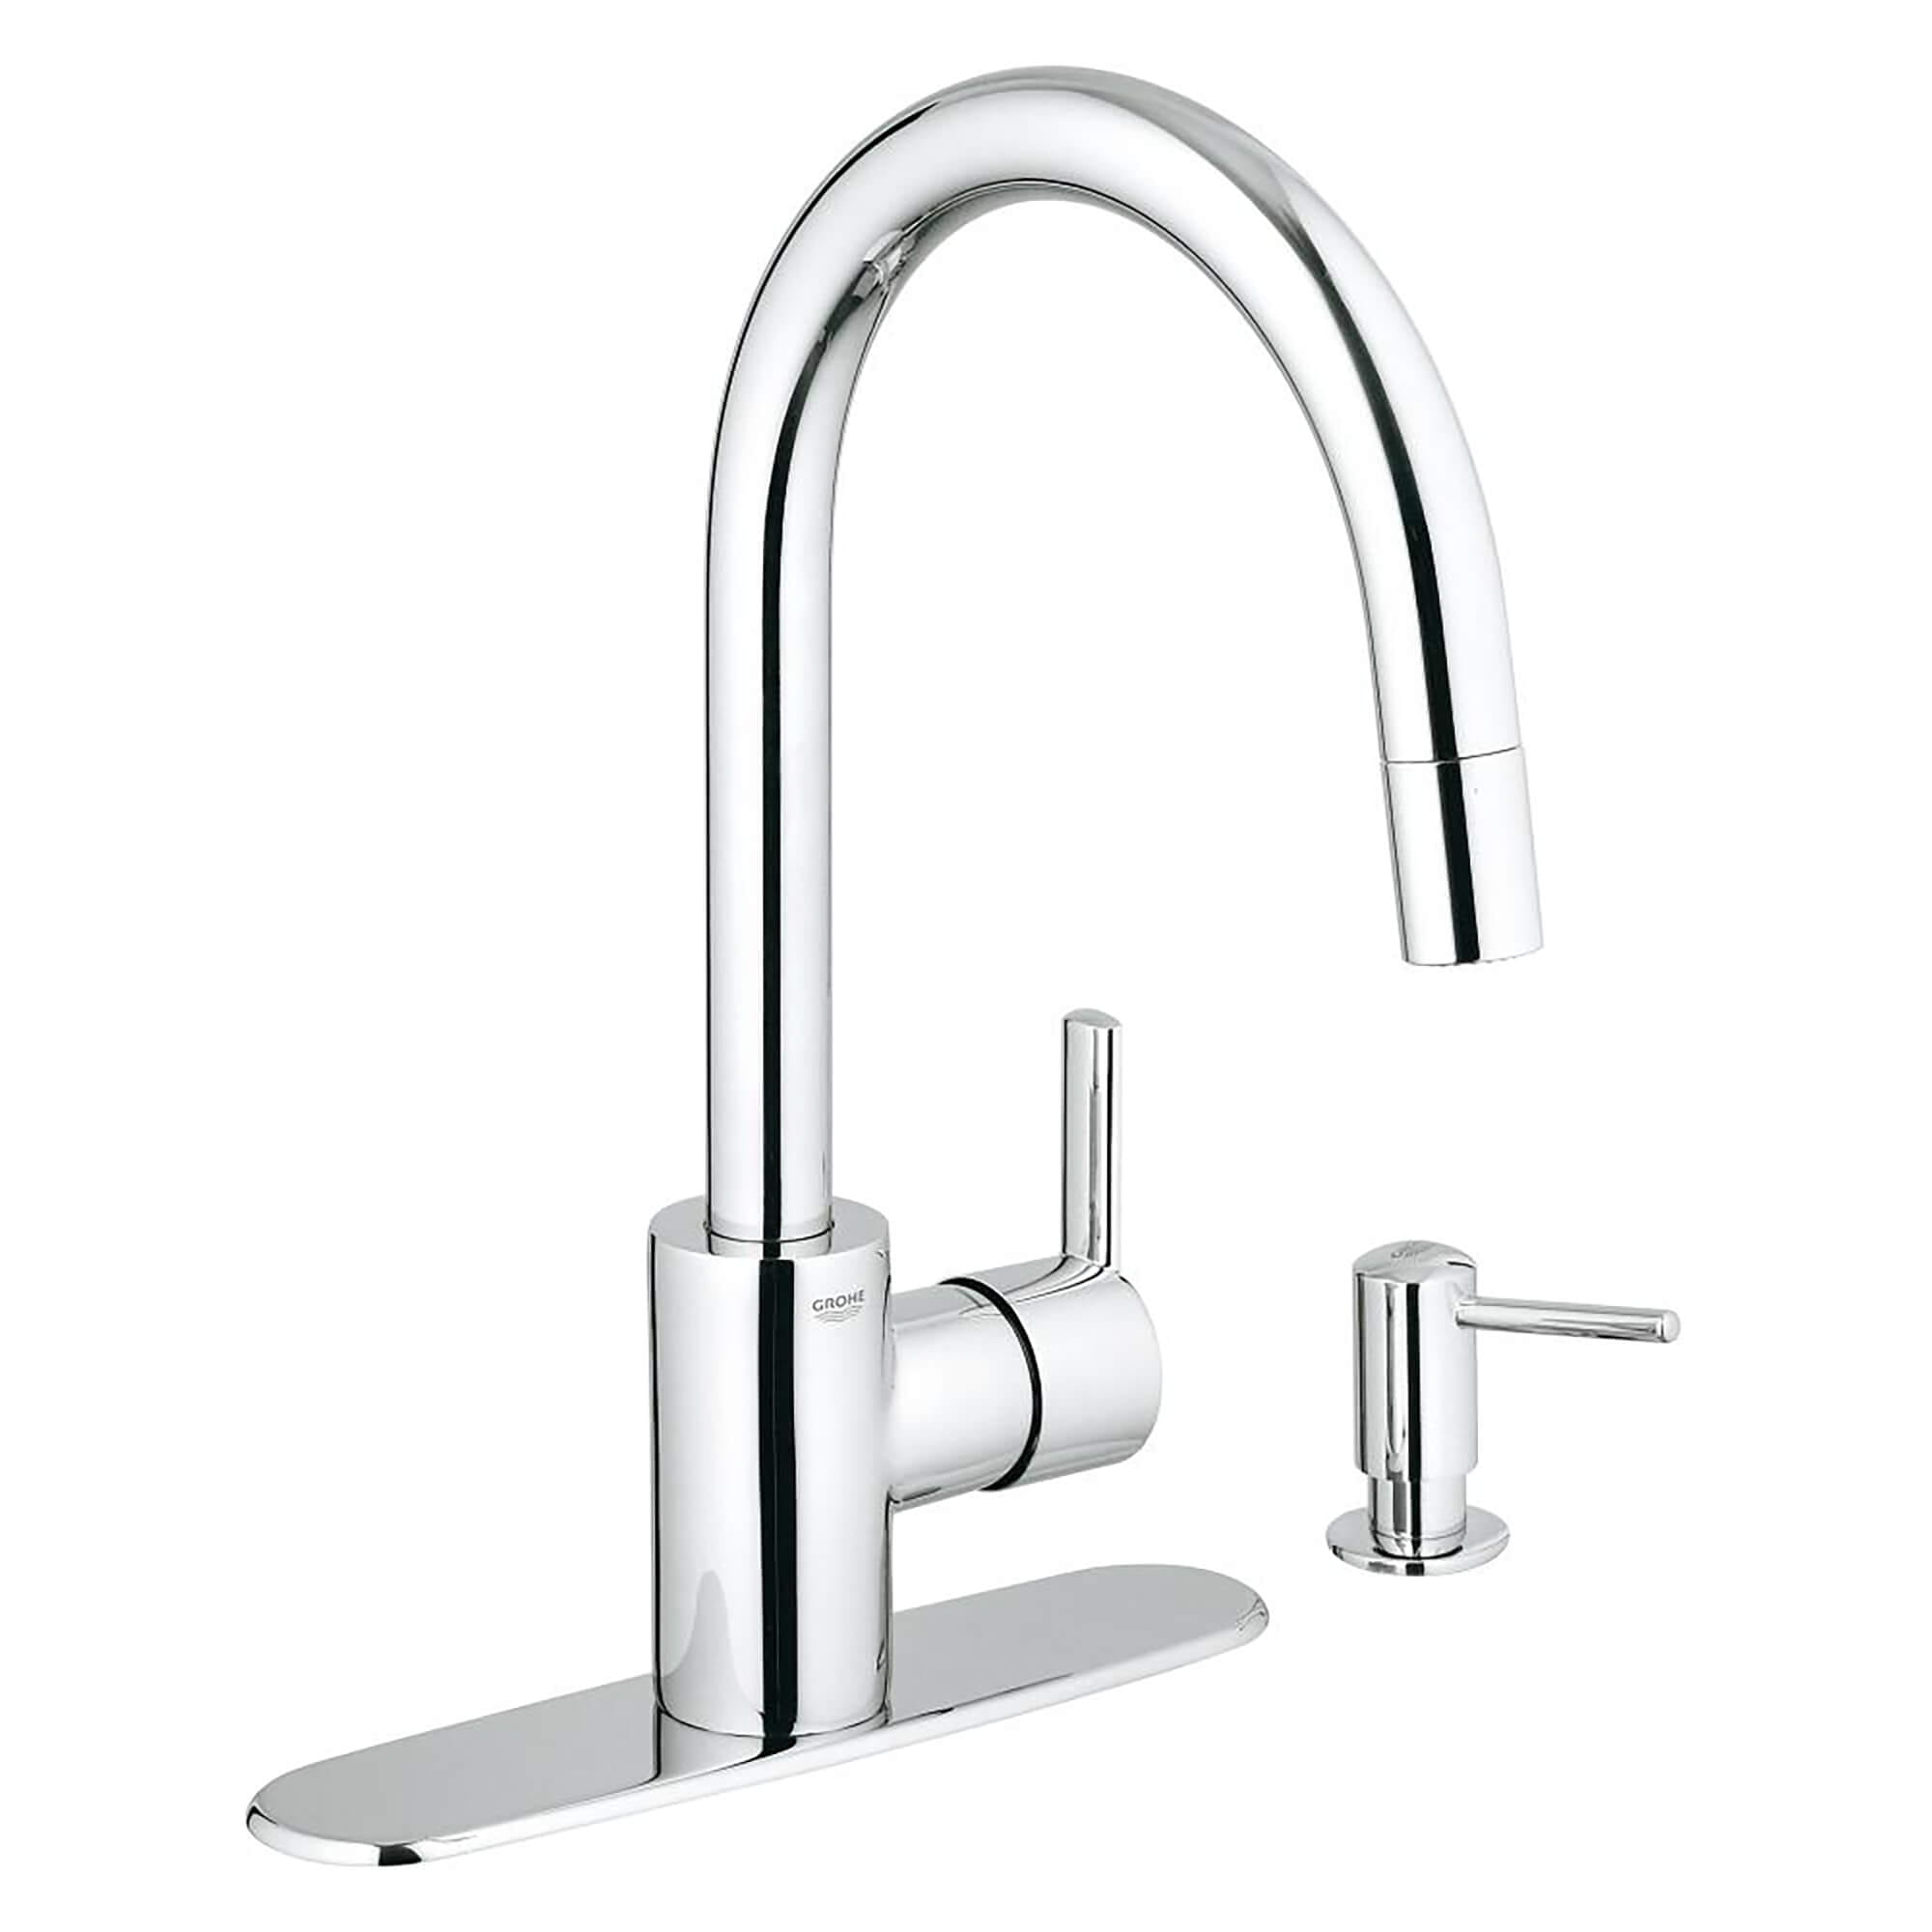 SINGLE-HANDLE PULL DOWN KITCHEN FAUCET DUAL SPRAY 1.75 GPM Model: 30126000-related